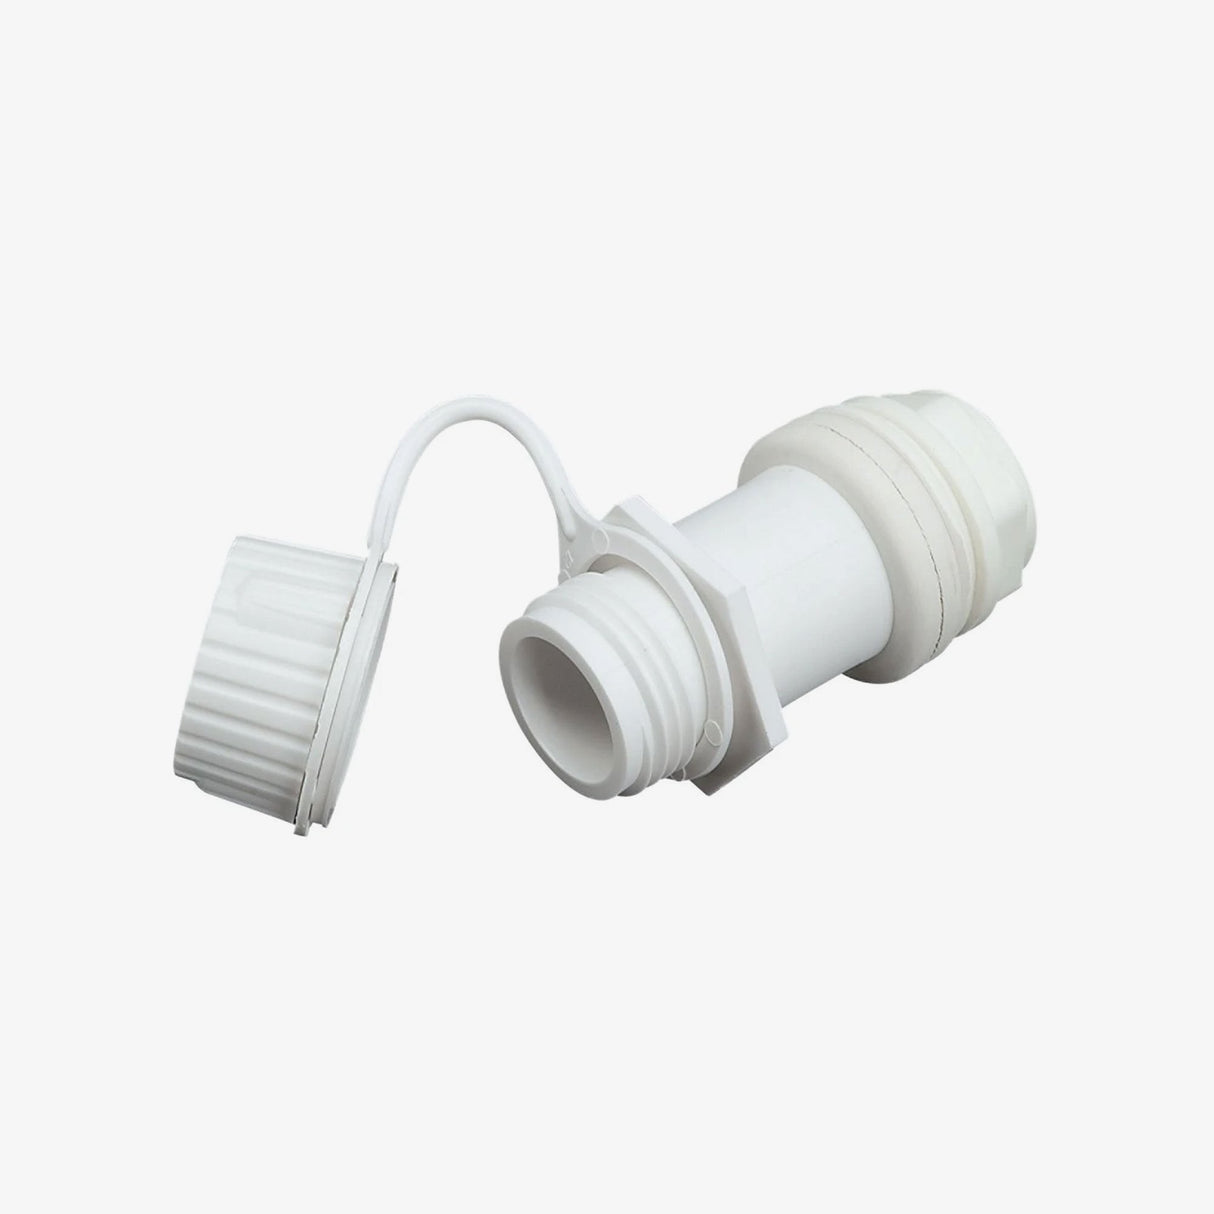 Igloo Threaded Drain Plug Assembly With Plastic Tethered Cap